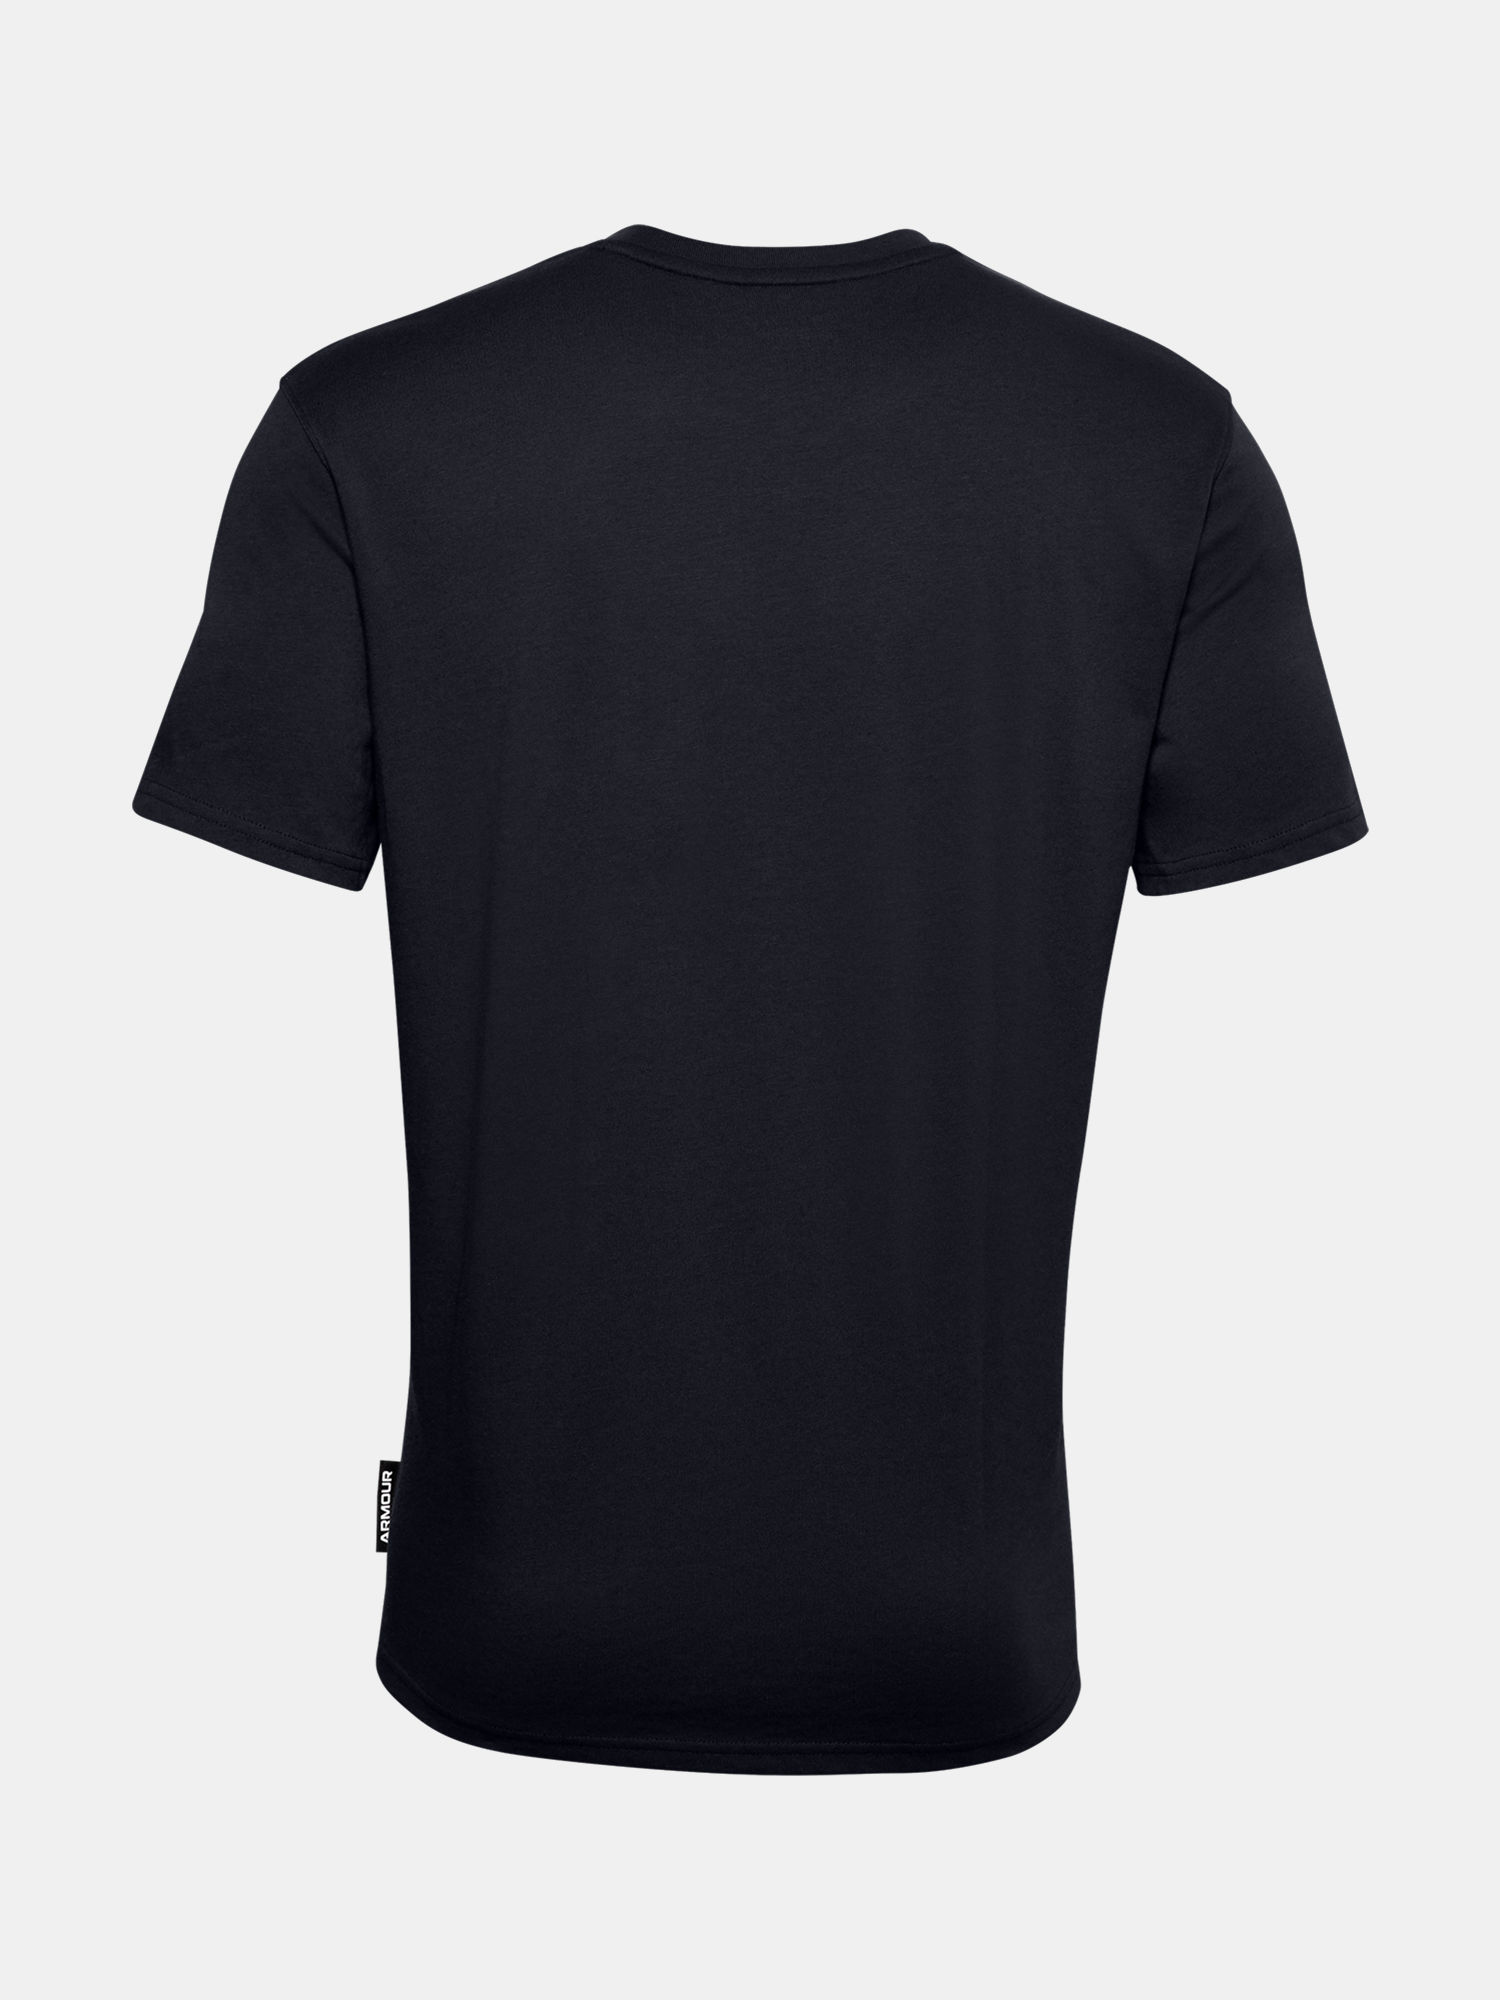 Tričko Under Armour CURRY EMBROIDERED TEE-BLK (4)